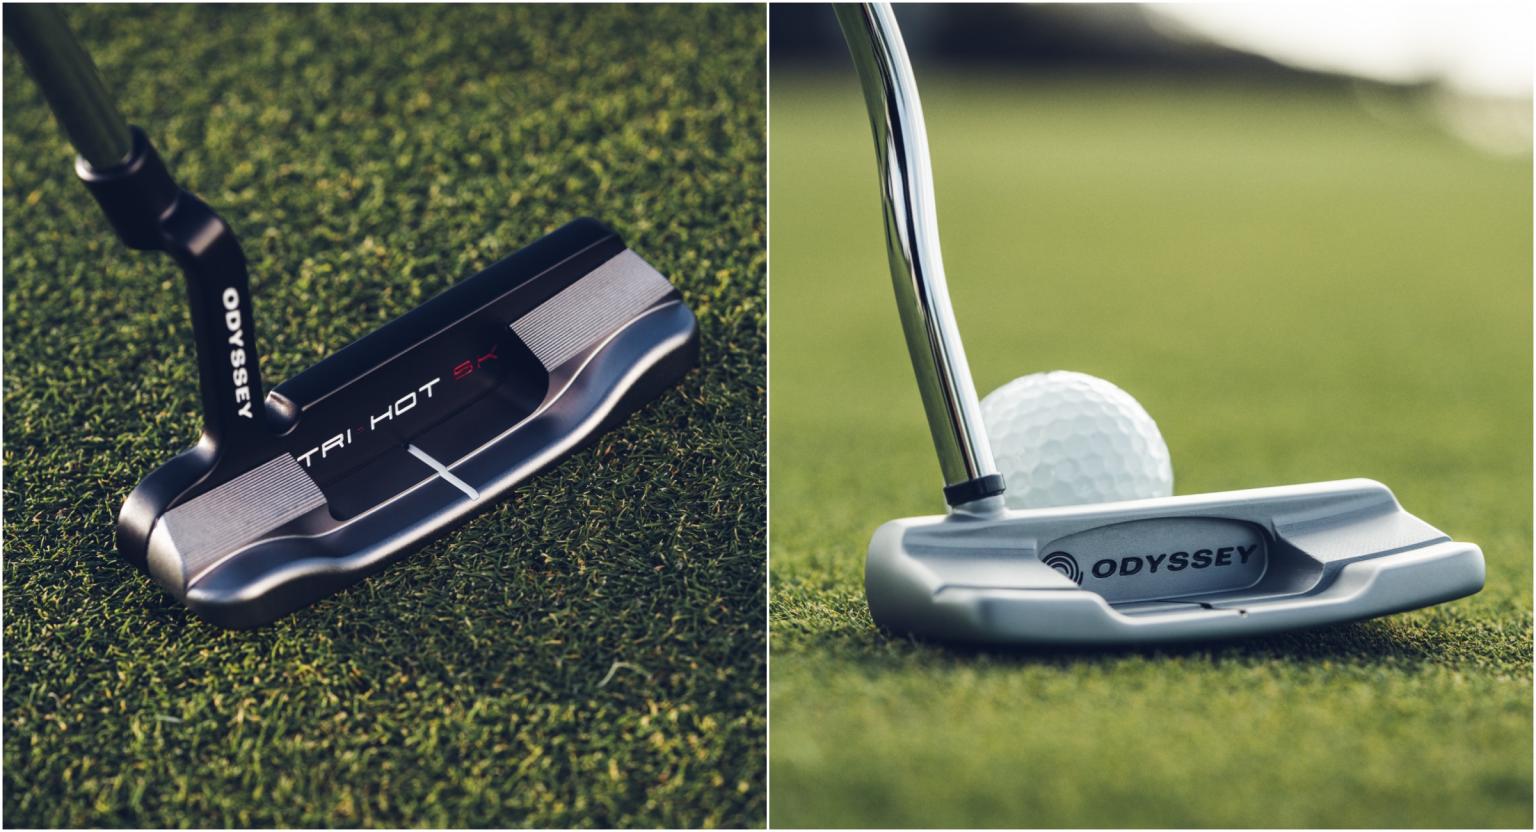 Odyssey introduce array of NEW PUTTERS, but which one will YOU buy